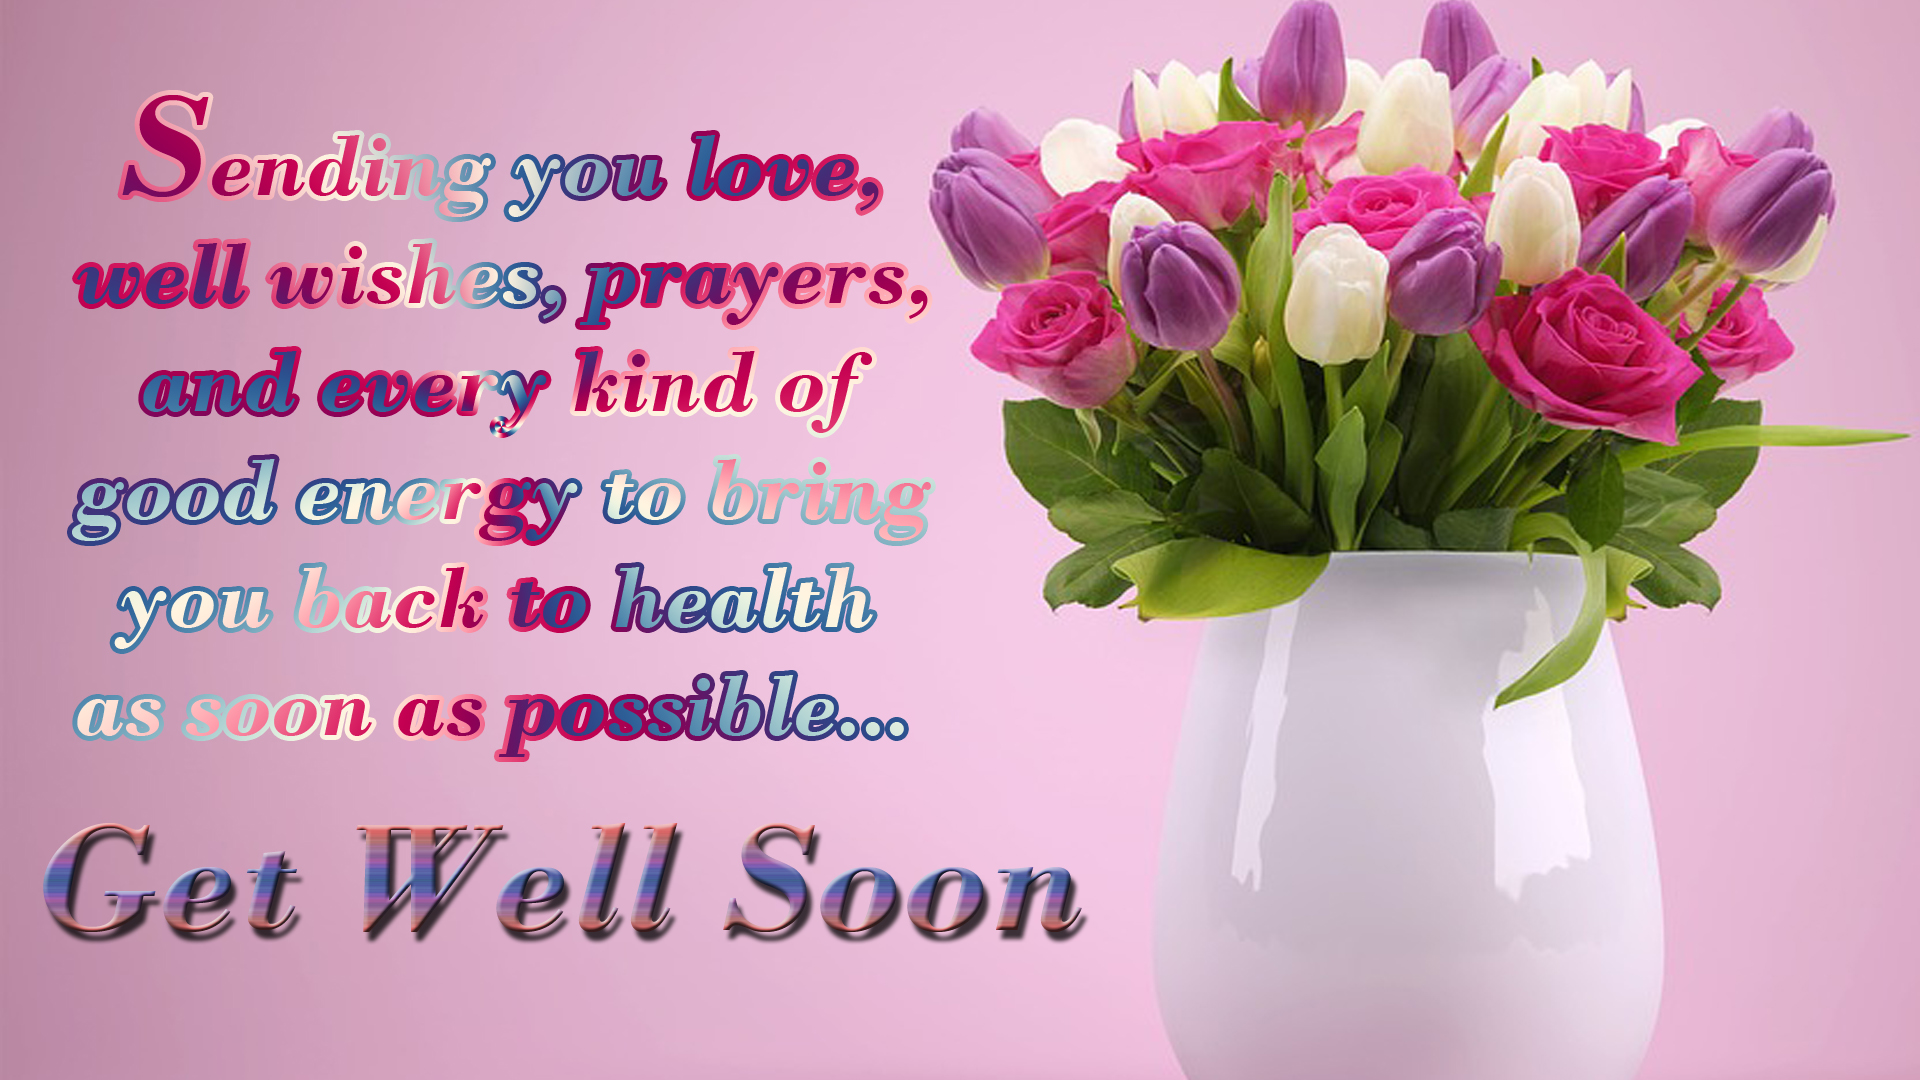 get well soon images 2018